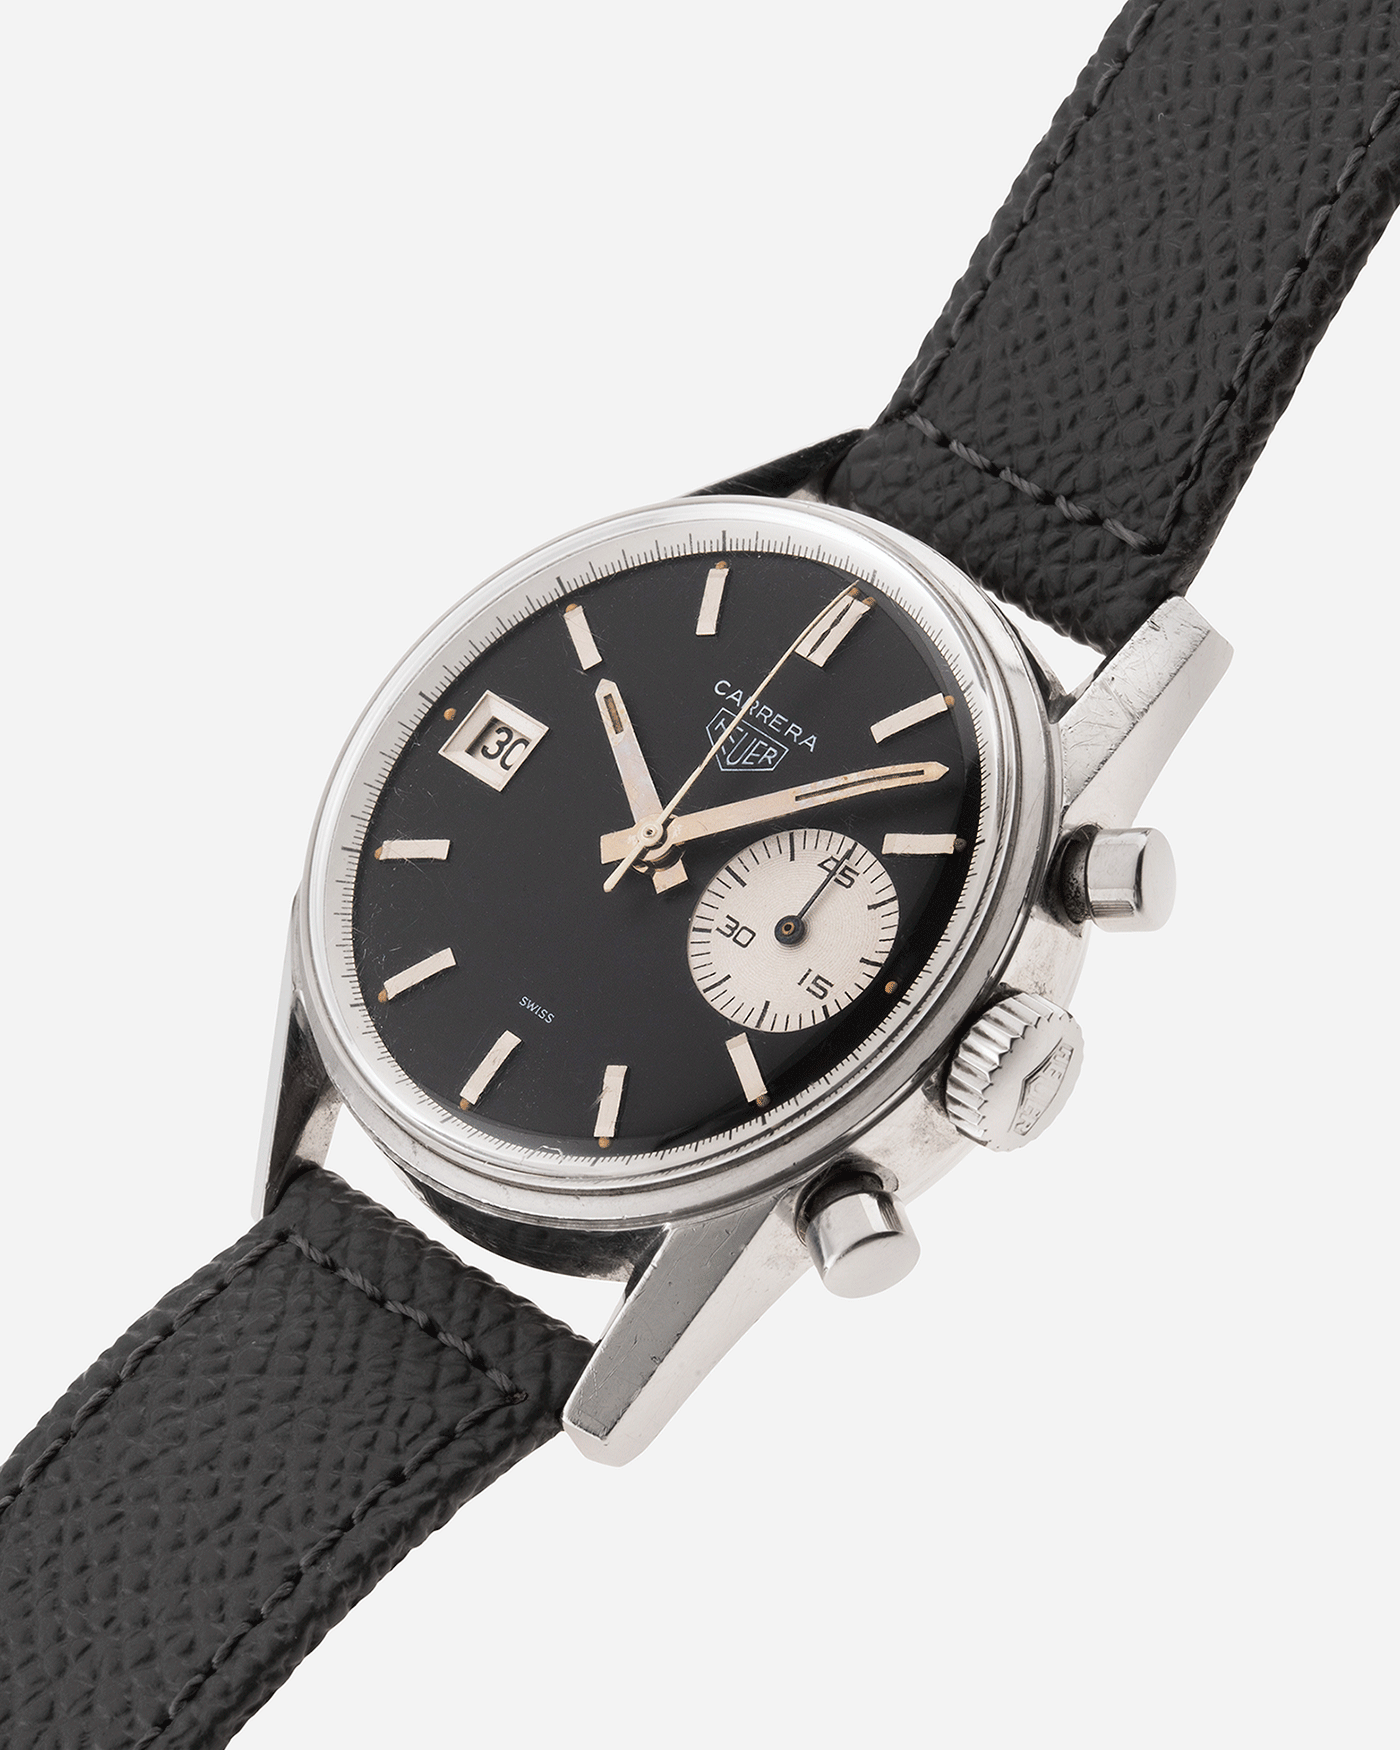 Brand: Heuer Year: 1960’s Model: Carrera Reference Number: Dato 45 Ref. 3147N Material: Stainless Steel Movement: Landeron 189 Case Diameter: 35mm Lug Width: 18mm Bracelet/Strap: A Collected Man Grey Textured Calf Strap